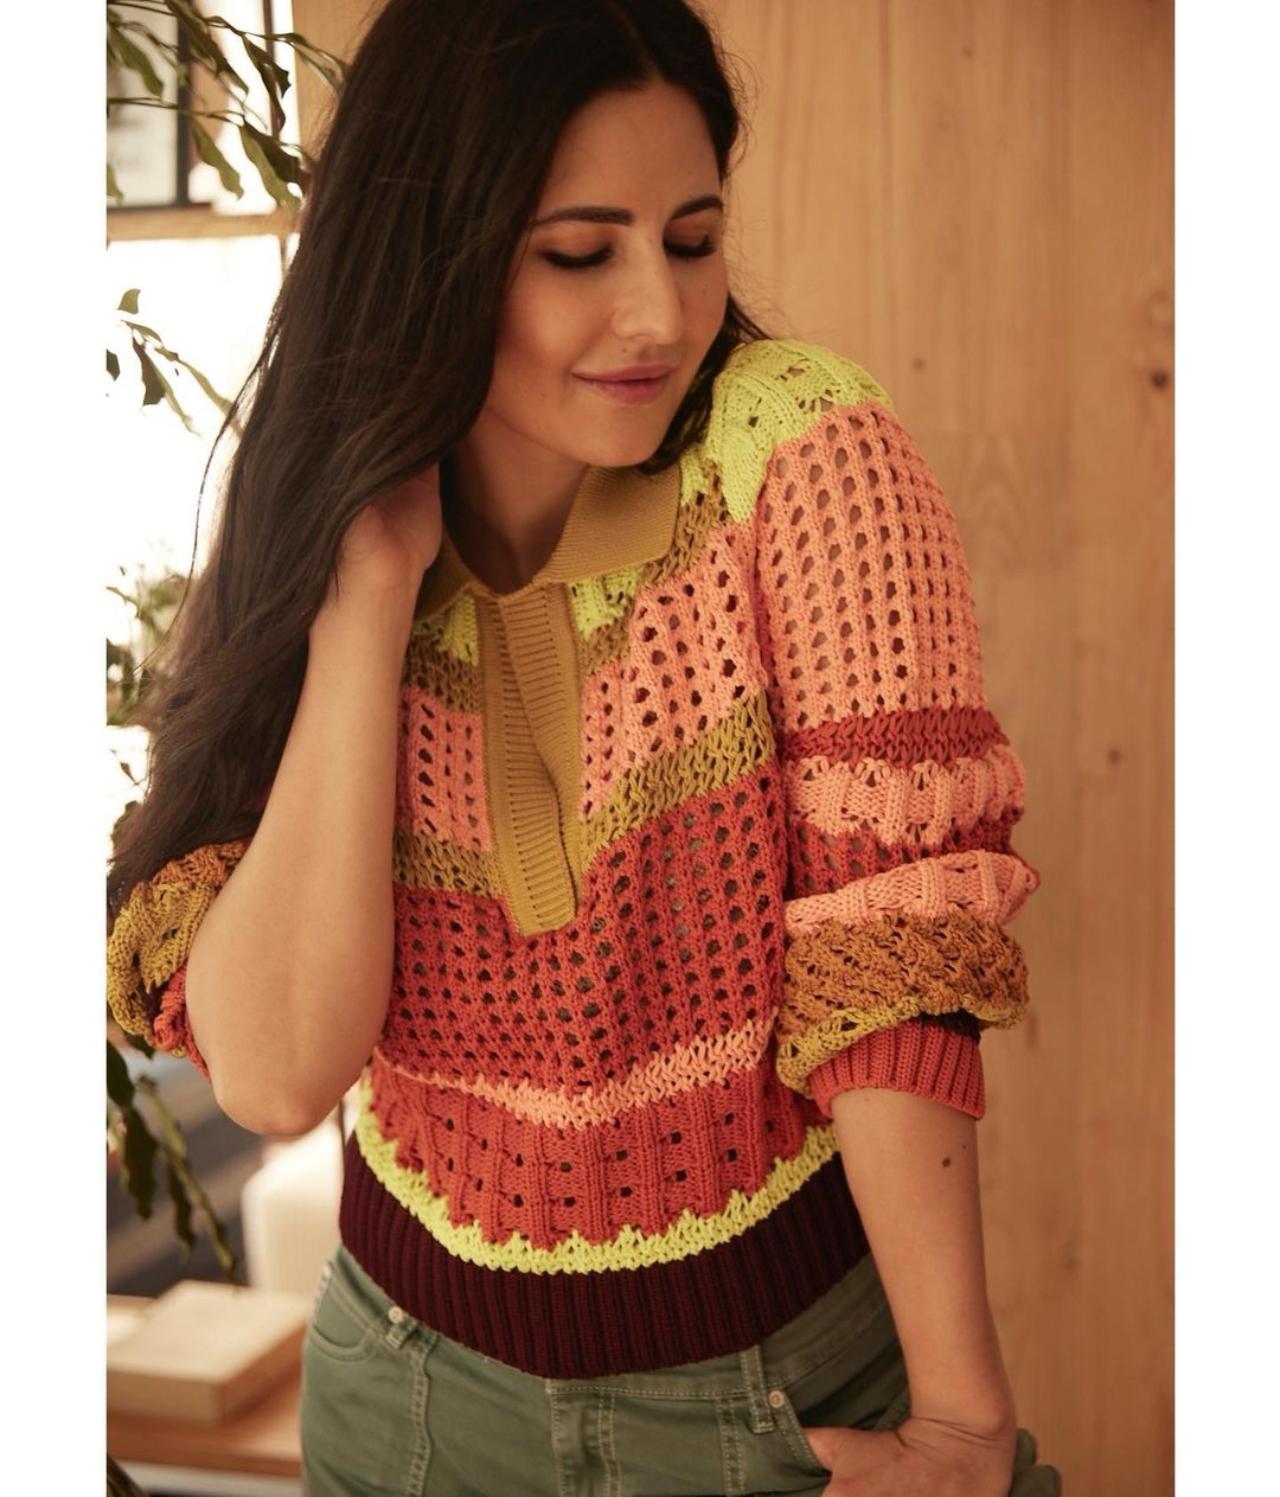 Winter Is Coming!: In early September, the “Sooryavanshi” star had shared a picture of herself on Instagram with a caption that read, “Morning”, along with a teacup and flower emoji. In the post, she can be seen flaunting a multi-coloured crochet sweater which she paired up with olive green denim. The ribbed-vibrant sweater which had a dash of neon colours also had a cute collar. Girls, get yourself a colourful crochet sweater just like Kat, so that y’all can slay on chilly days.